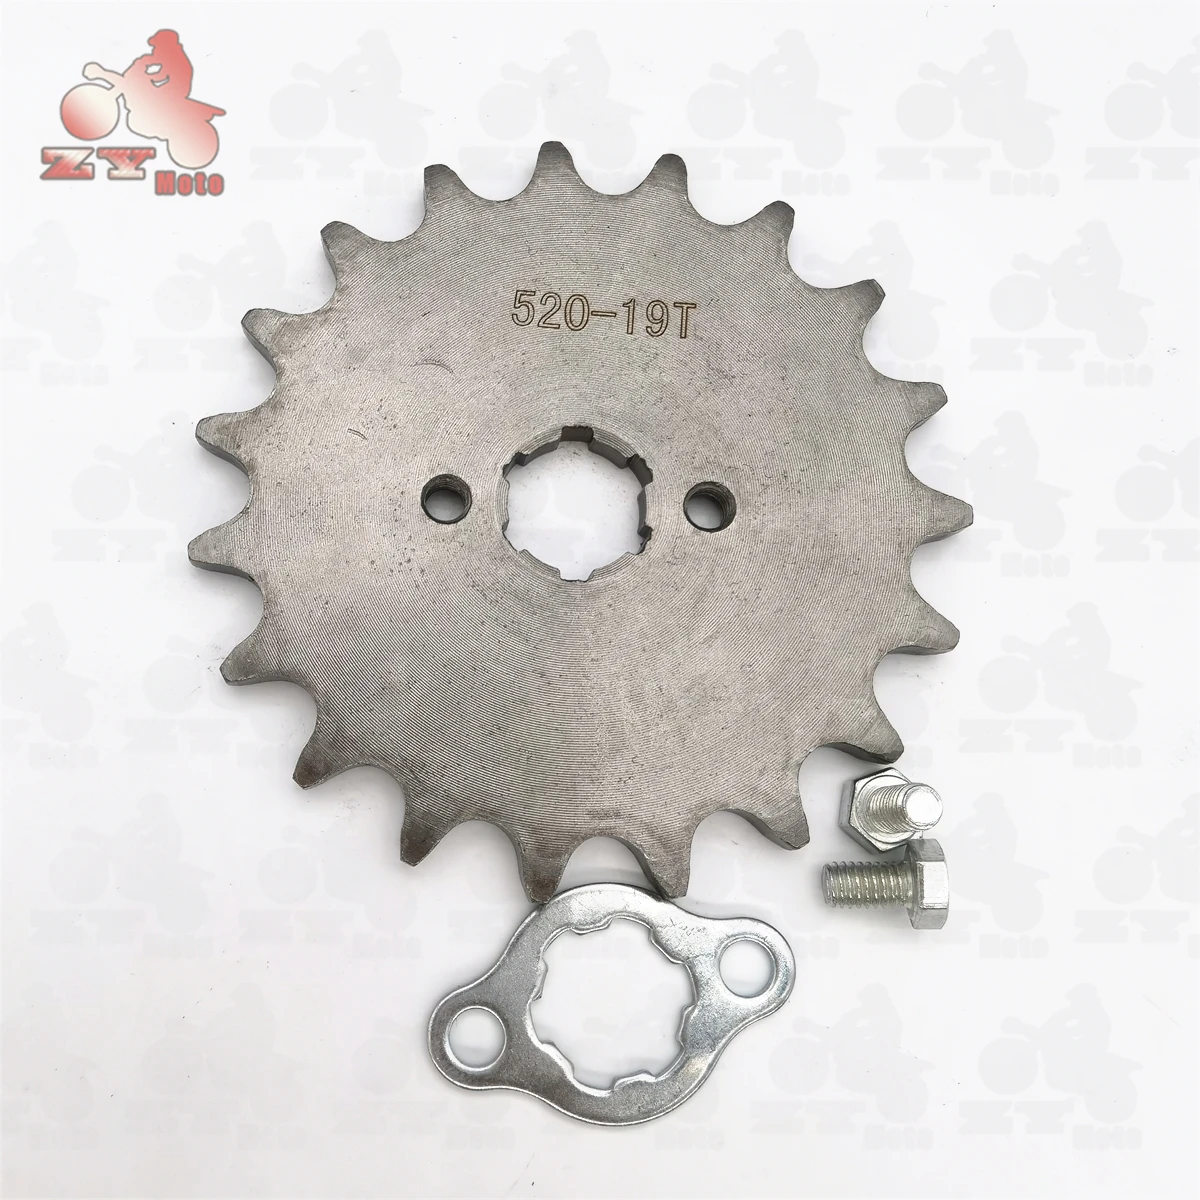 

520# 20mm Front Engine Sprocket 10 11 12 13 14 15 16 17 18 19T Tooth For Dirt Pit Bike ATV Kart Buggy Scooter Motorcycle